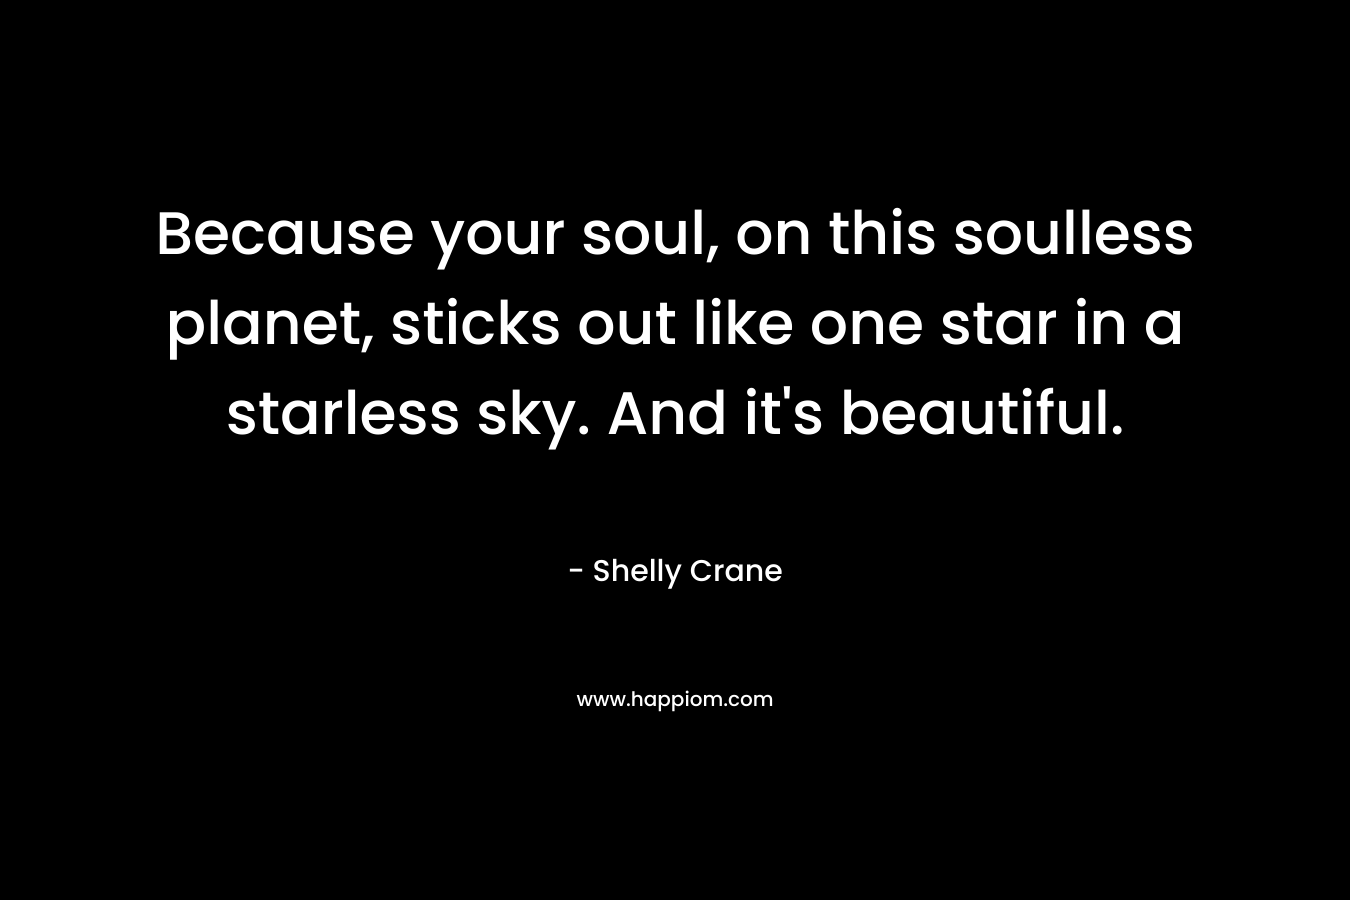 Because your soul, on this soulless planet, sticks out like one star in a starless sky. And it’s beautiful. – Shelly Crane